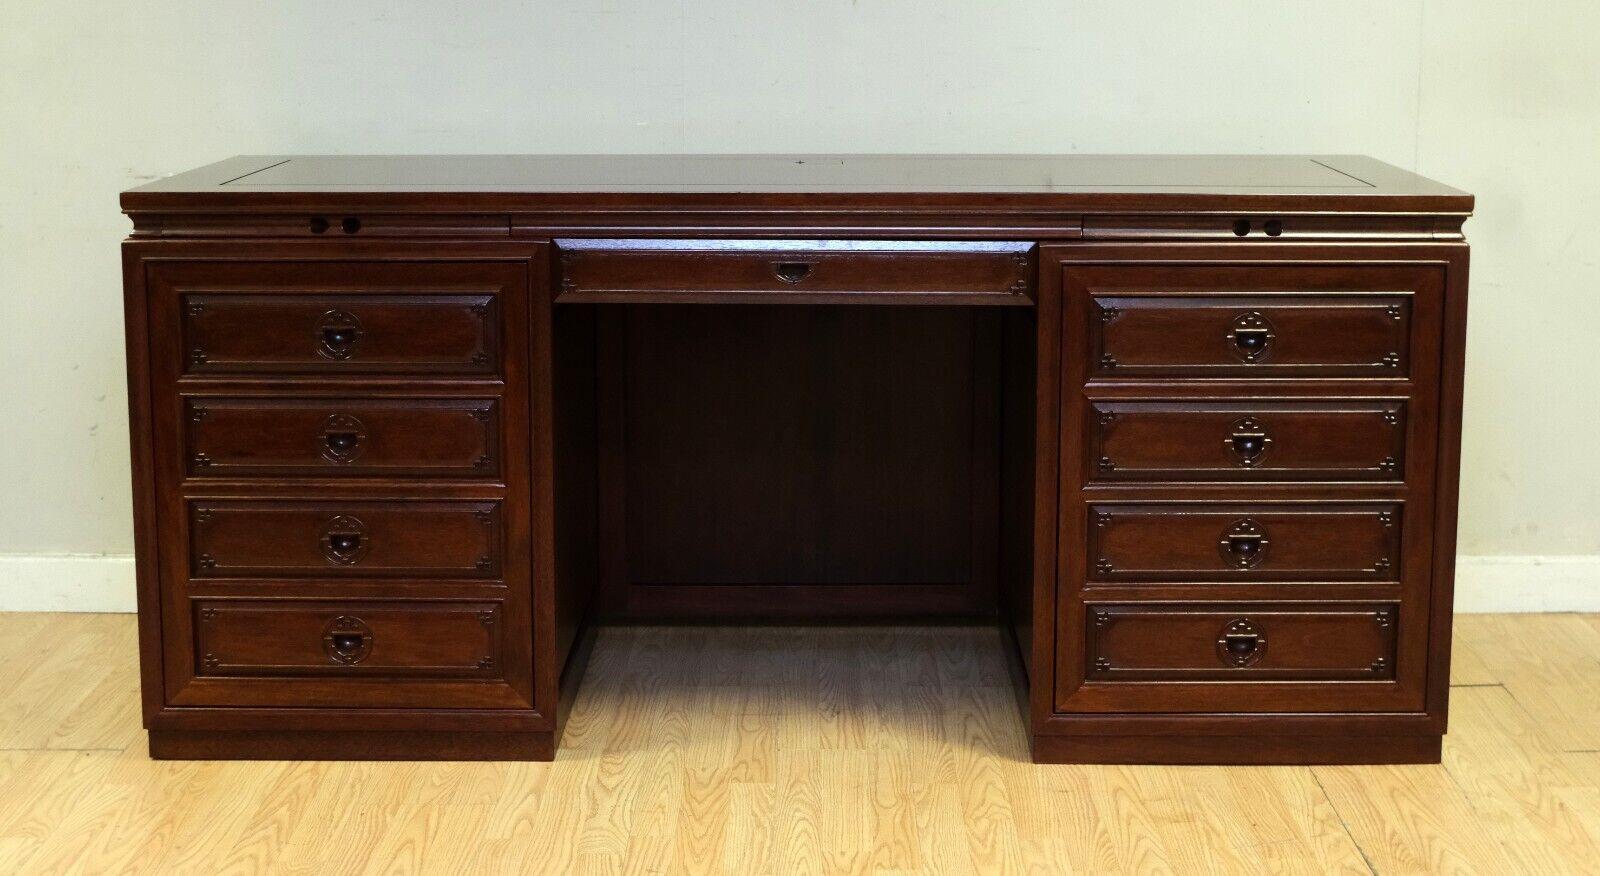 Chinese Export LOVELY 20TH C CHINESE HARDWOOD PEDESTAL DESK WiTH CENTRAL DRAWER BRUSHING SLIDES